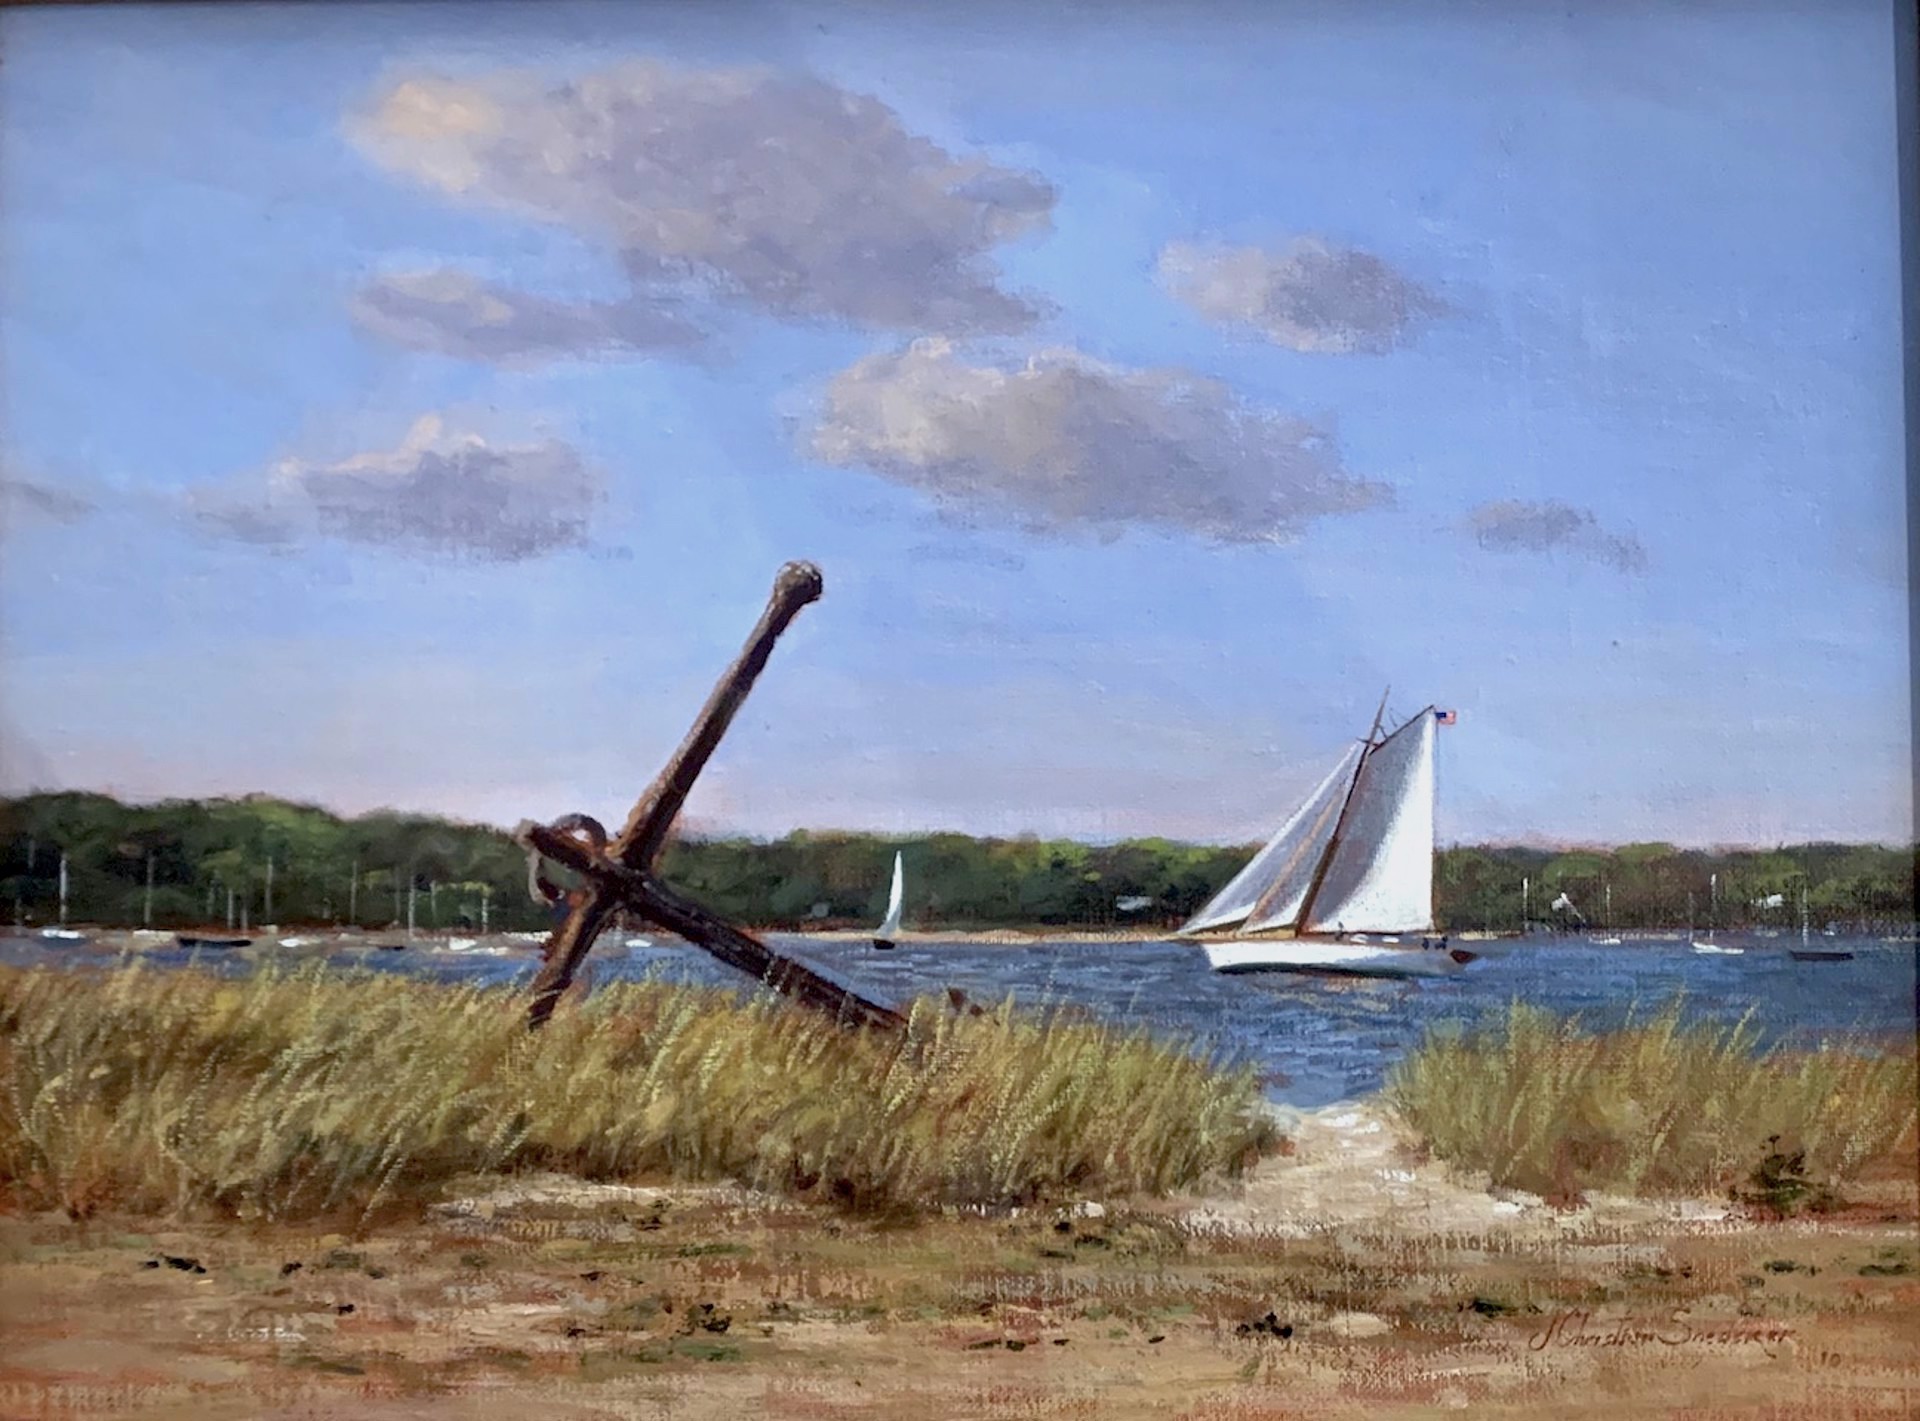 Vineyard Haven, Anchor and Sail by J. Christian Snedeker